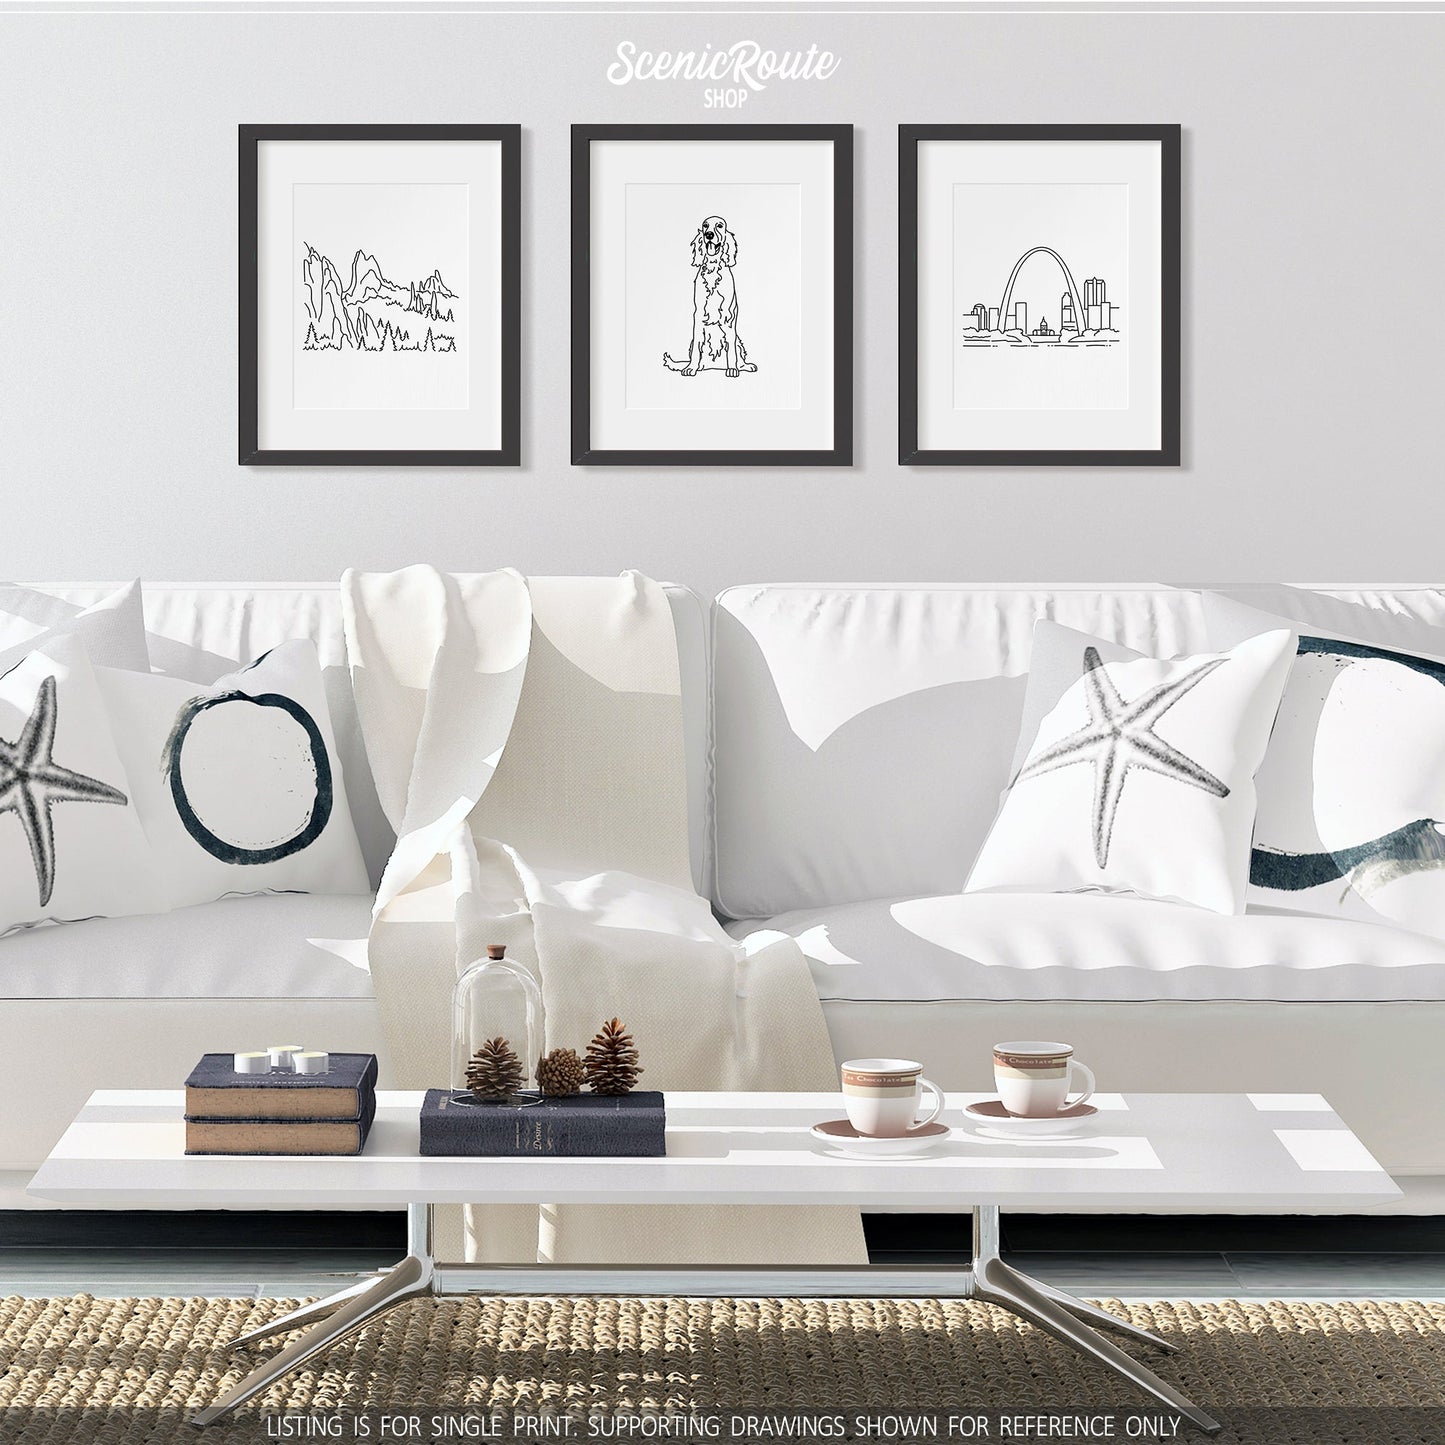 A group of three framed drawings on a white wall above a couch. The line art drawings include the Garden of the Gods, an Irish Setter dog, and the Saint Louis Skyline